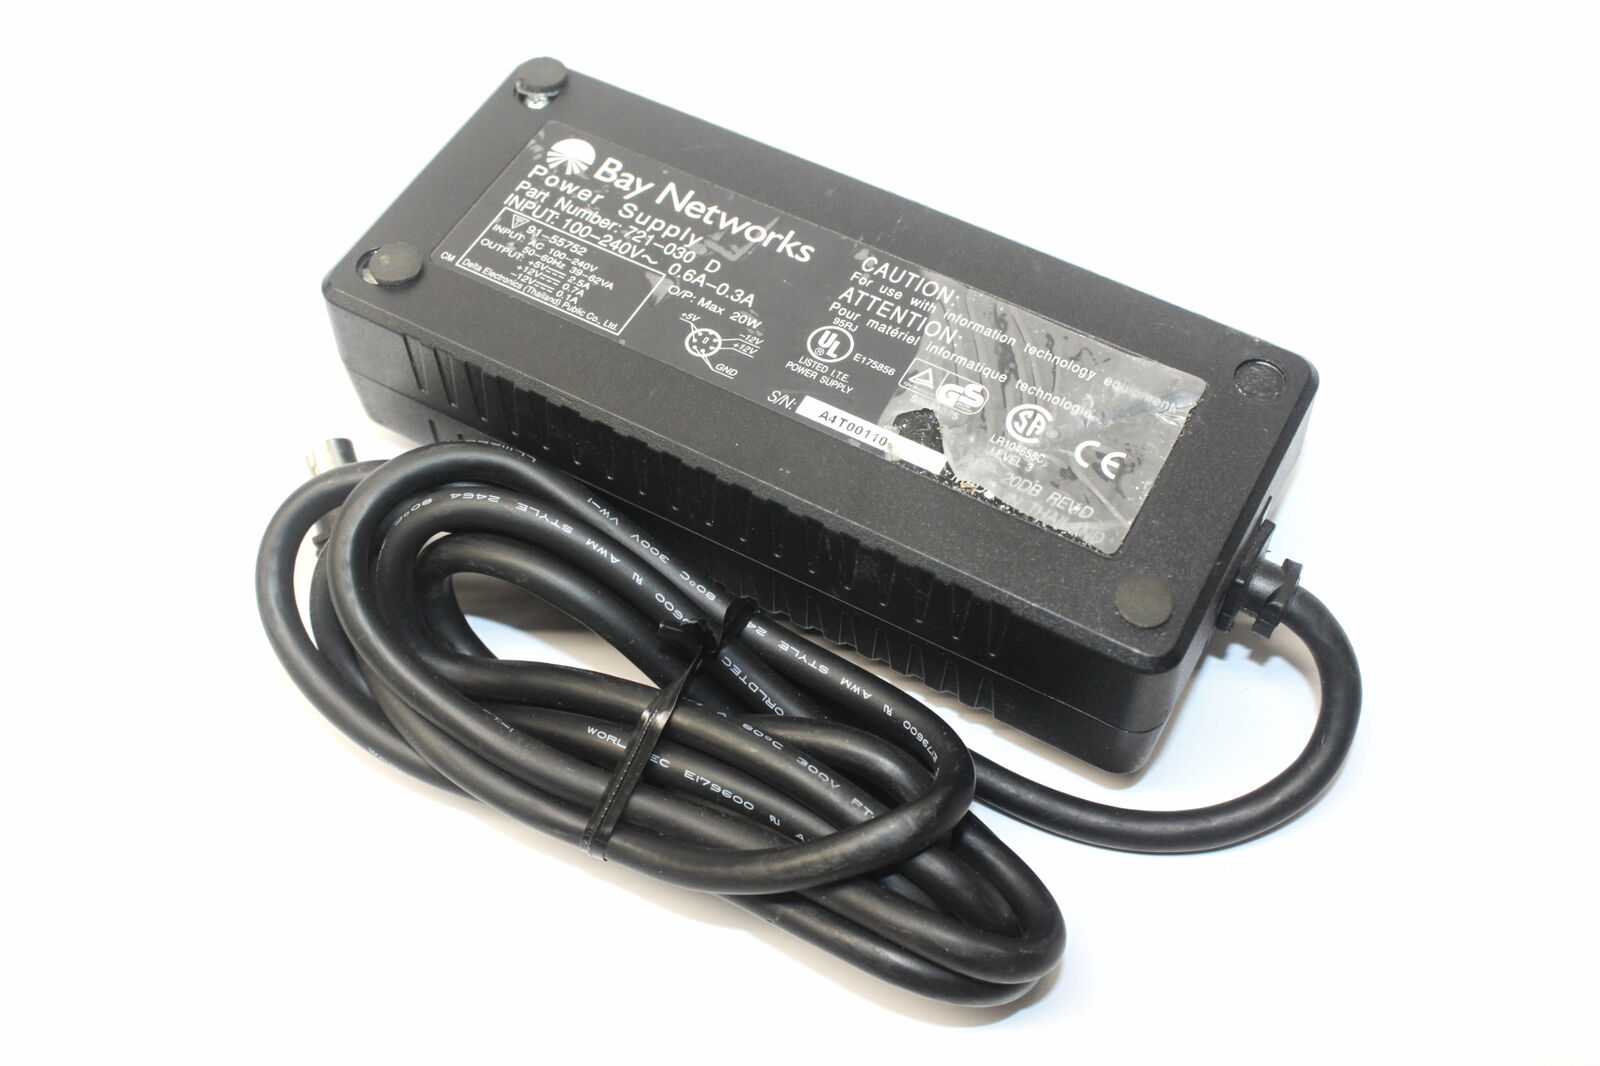 Bay Networks 721-030 D Power Supply AC Adapter Output DC 5V/12V 2.5A/0.7A/0.1A Brand: Bay Networks Type: Adapter M